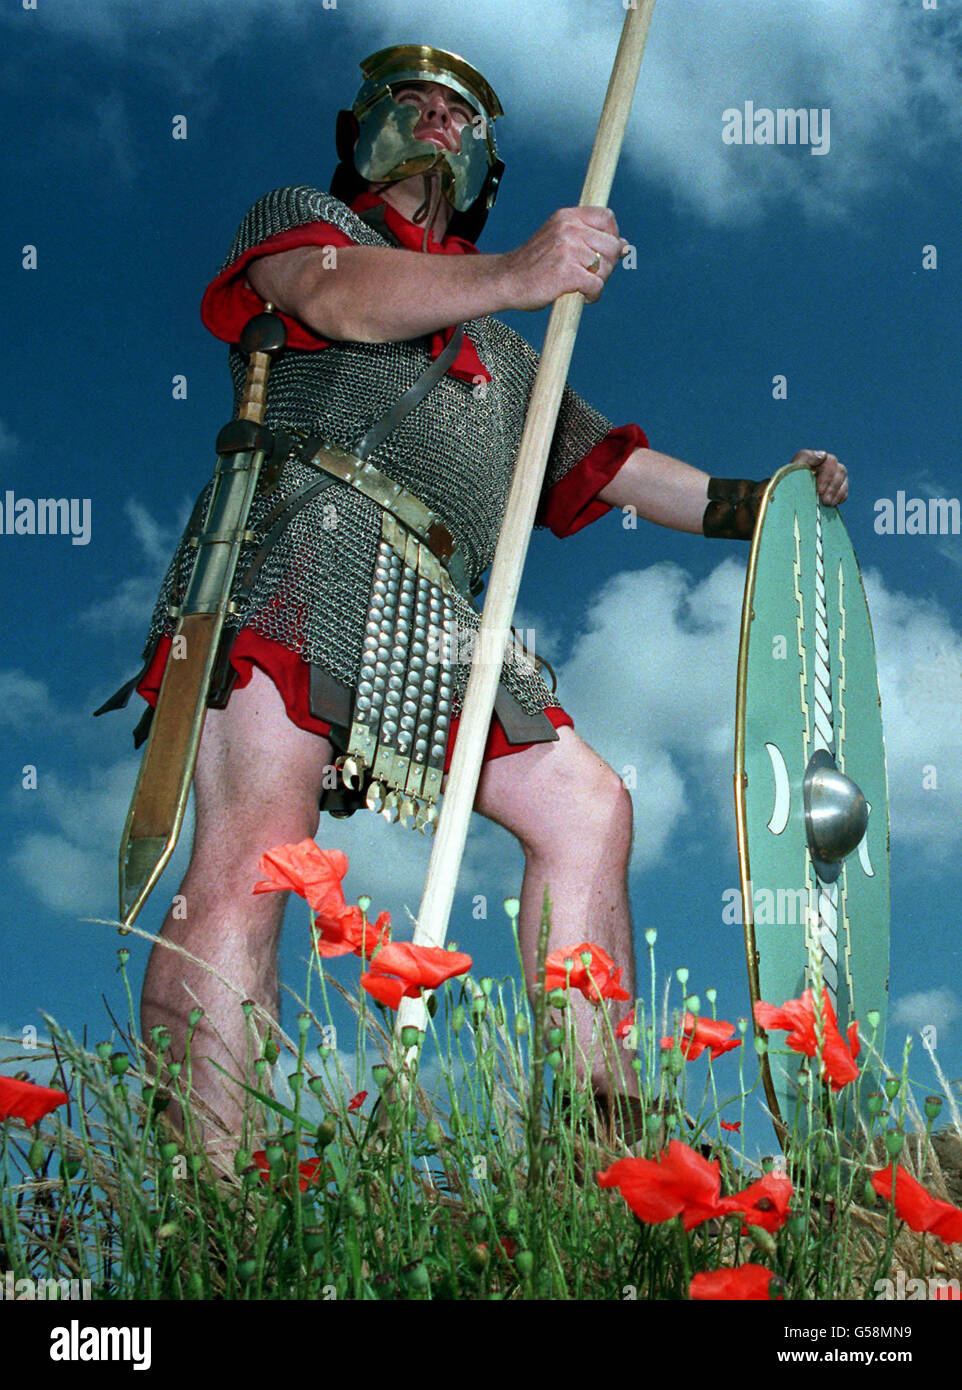 ROMAN BRITAIN: A man dressed in the equipment of a Roman army Auxiliary, circa late 1st century AD, stands near the site of the dig at Stanway, nr Colchester, where medical instruments have been unearthed. Colchester was an important Roman city, then known as Camulodunum. Stock Photo